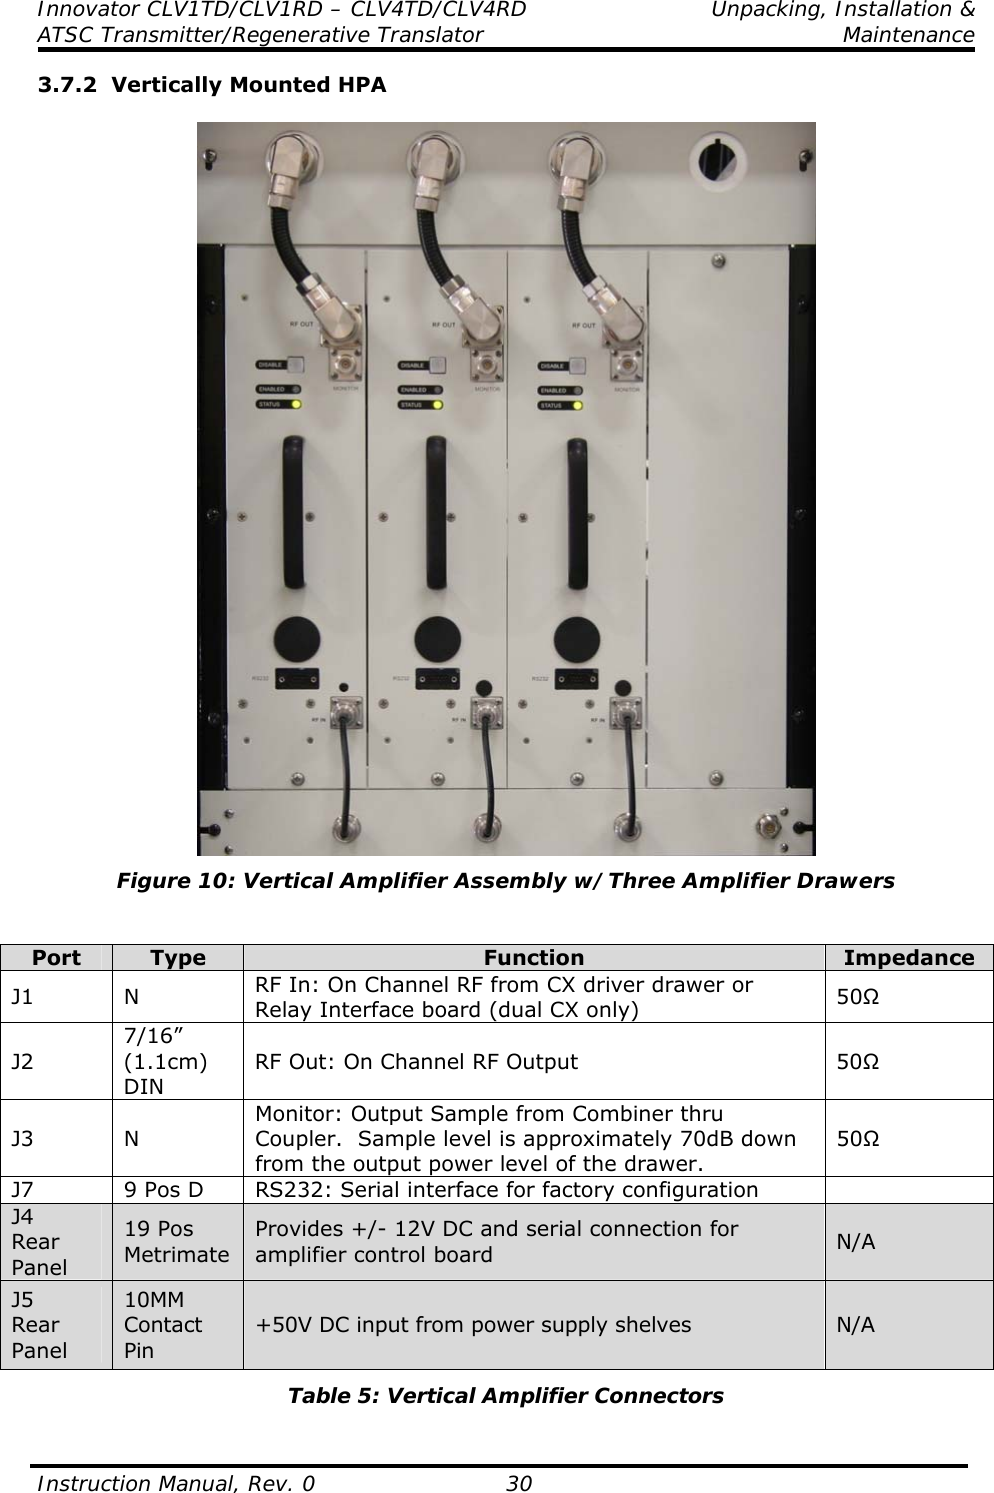 Innovator CLV1TD/CLV1RD – CLV4TD/CLV4RD  Unpacking, Installation &amp; ATSC Transmitter/Regenerative Translator  Maintenance  Instruction Manual, Rev. 0    30 3.7.2  Vertically Mounted HPA   Figure 10: Vertical Amplifier Assembly w/Three Amplifier Drawers   Port  Type  Function  Impedance J1 N  RF In: On Channel RF from CX driver drawer or Relay Interface board (dual CX only)  50 J2 7/16” (1.1cm) DIN RF Out: On Channel RF Output  50 J3  N Monitor: Output Sample from Combiner thru Coupler.  Sample level is approximately 70dB down from the output power level of the drawer. 50 J7  9 Pos D  RS232: Serial interface for factory configuration   J4 Rear Panel 19 Pos Metrimate Provides +/- 12V DC and serial connection for amplifier control board  N/A J5 Rear Panel 10MM Contact Pin +50V DC input from power supply shelves  N/A Table 5: Vertical Amplifier Connectors   